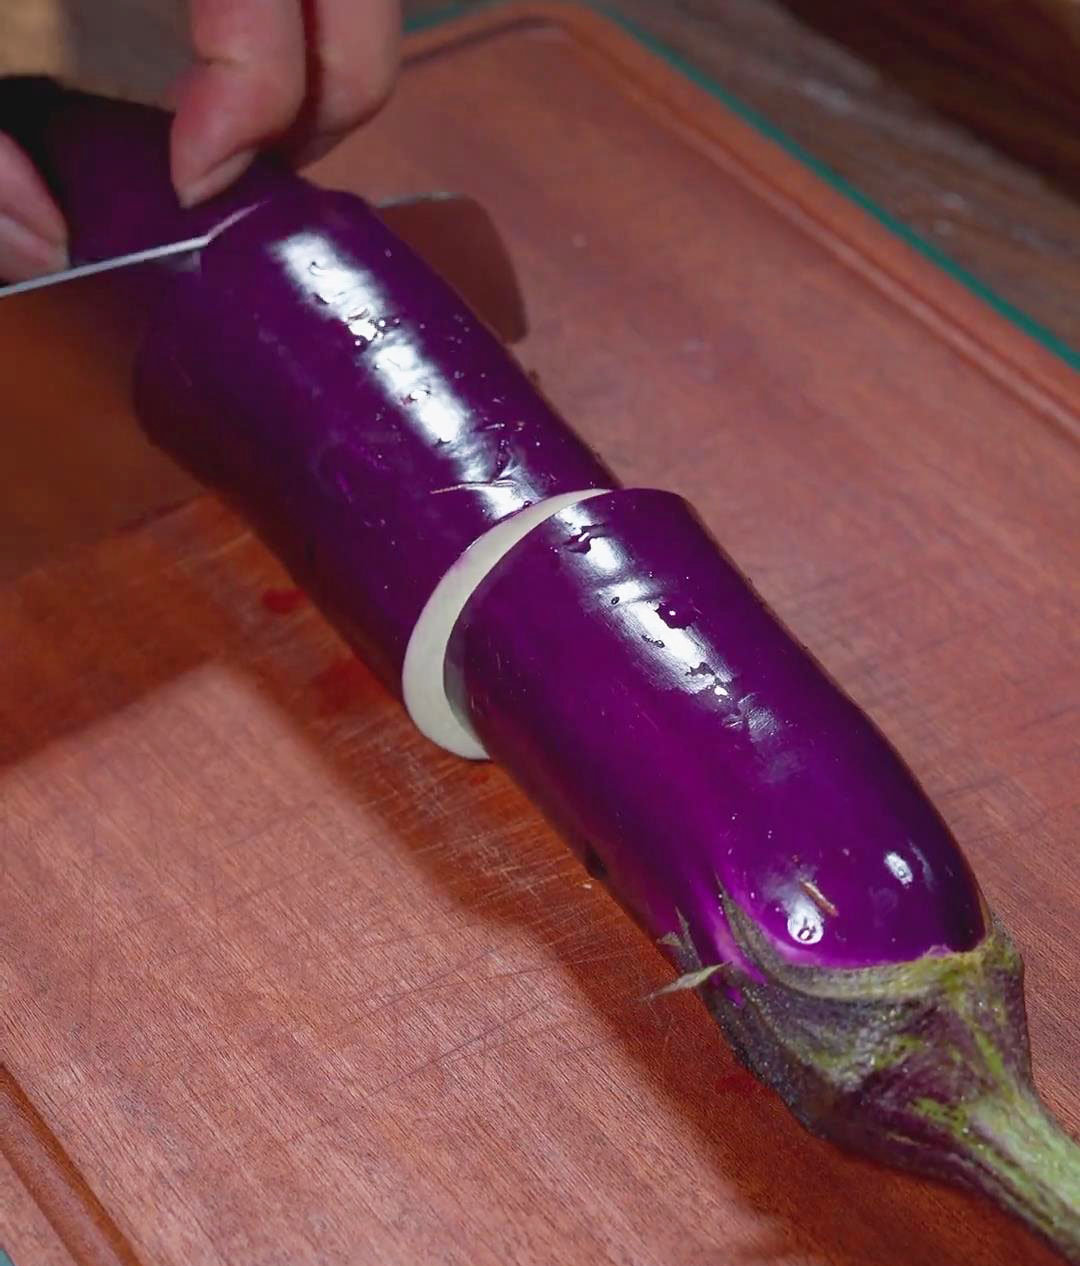 Cut the eggplant into 3 pieces